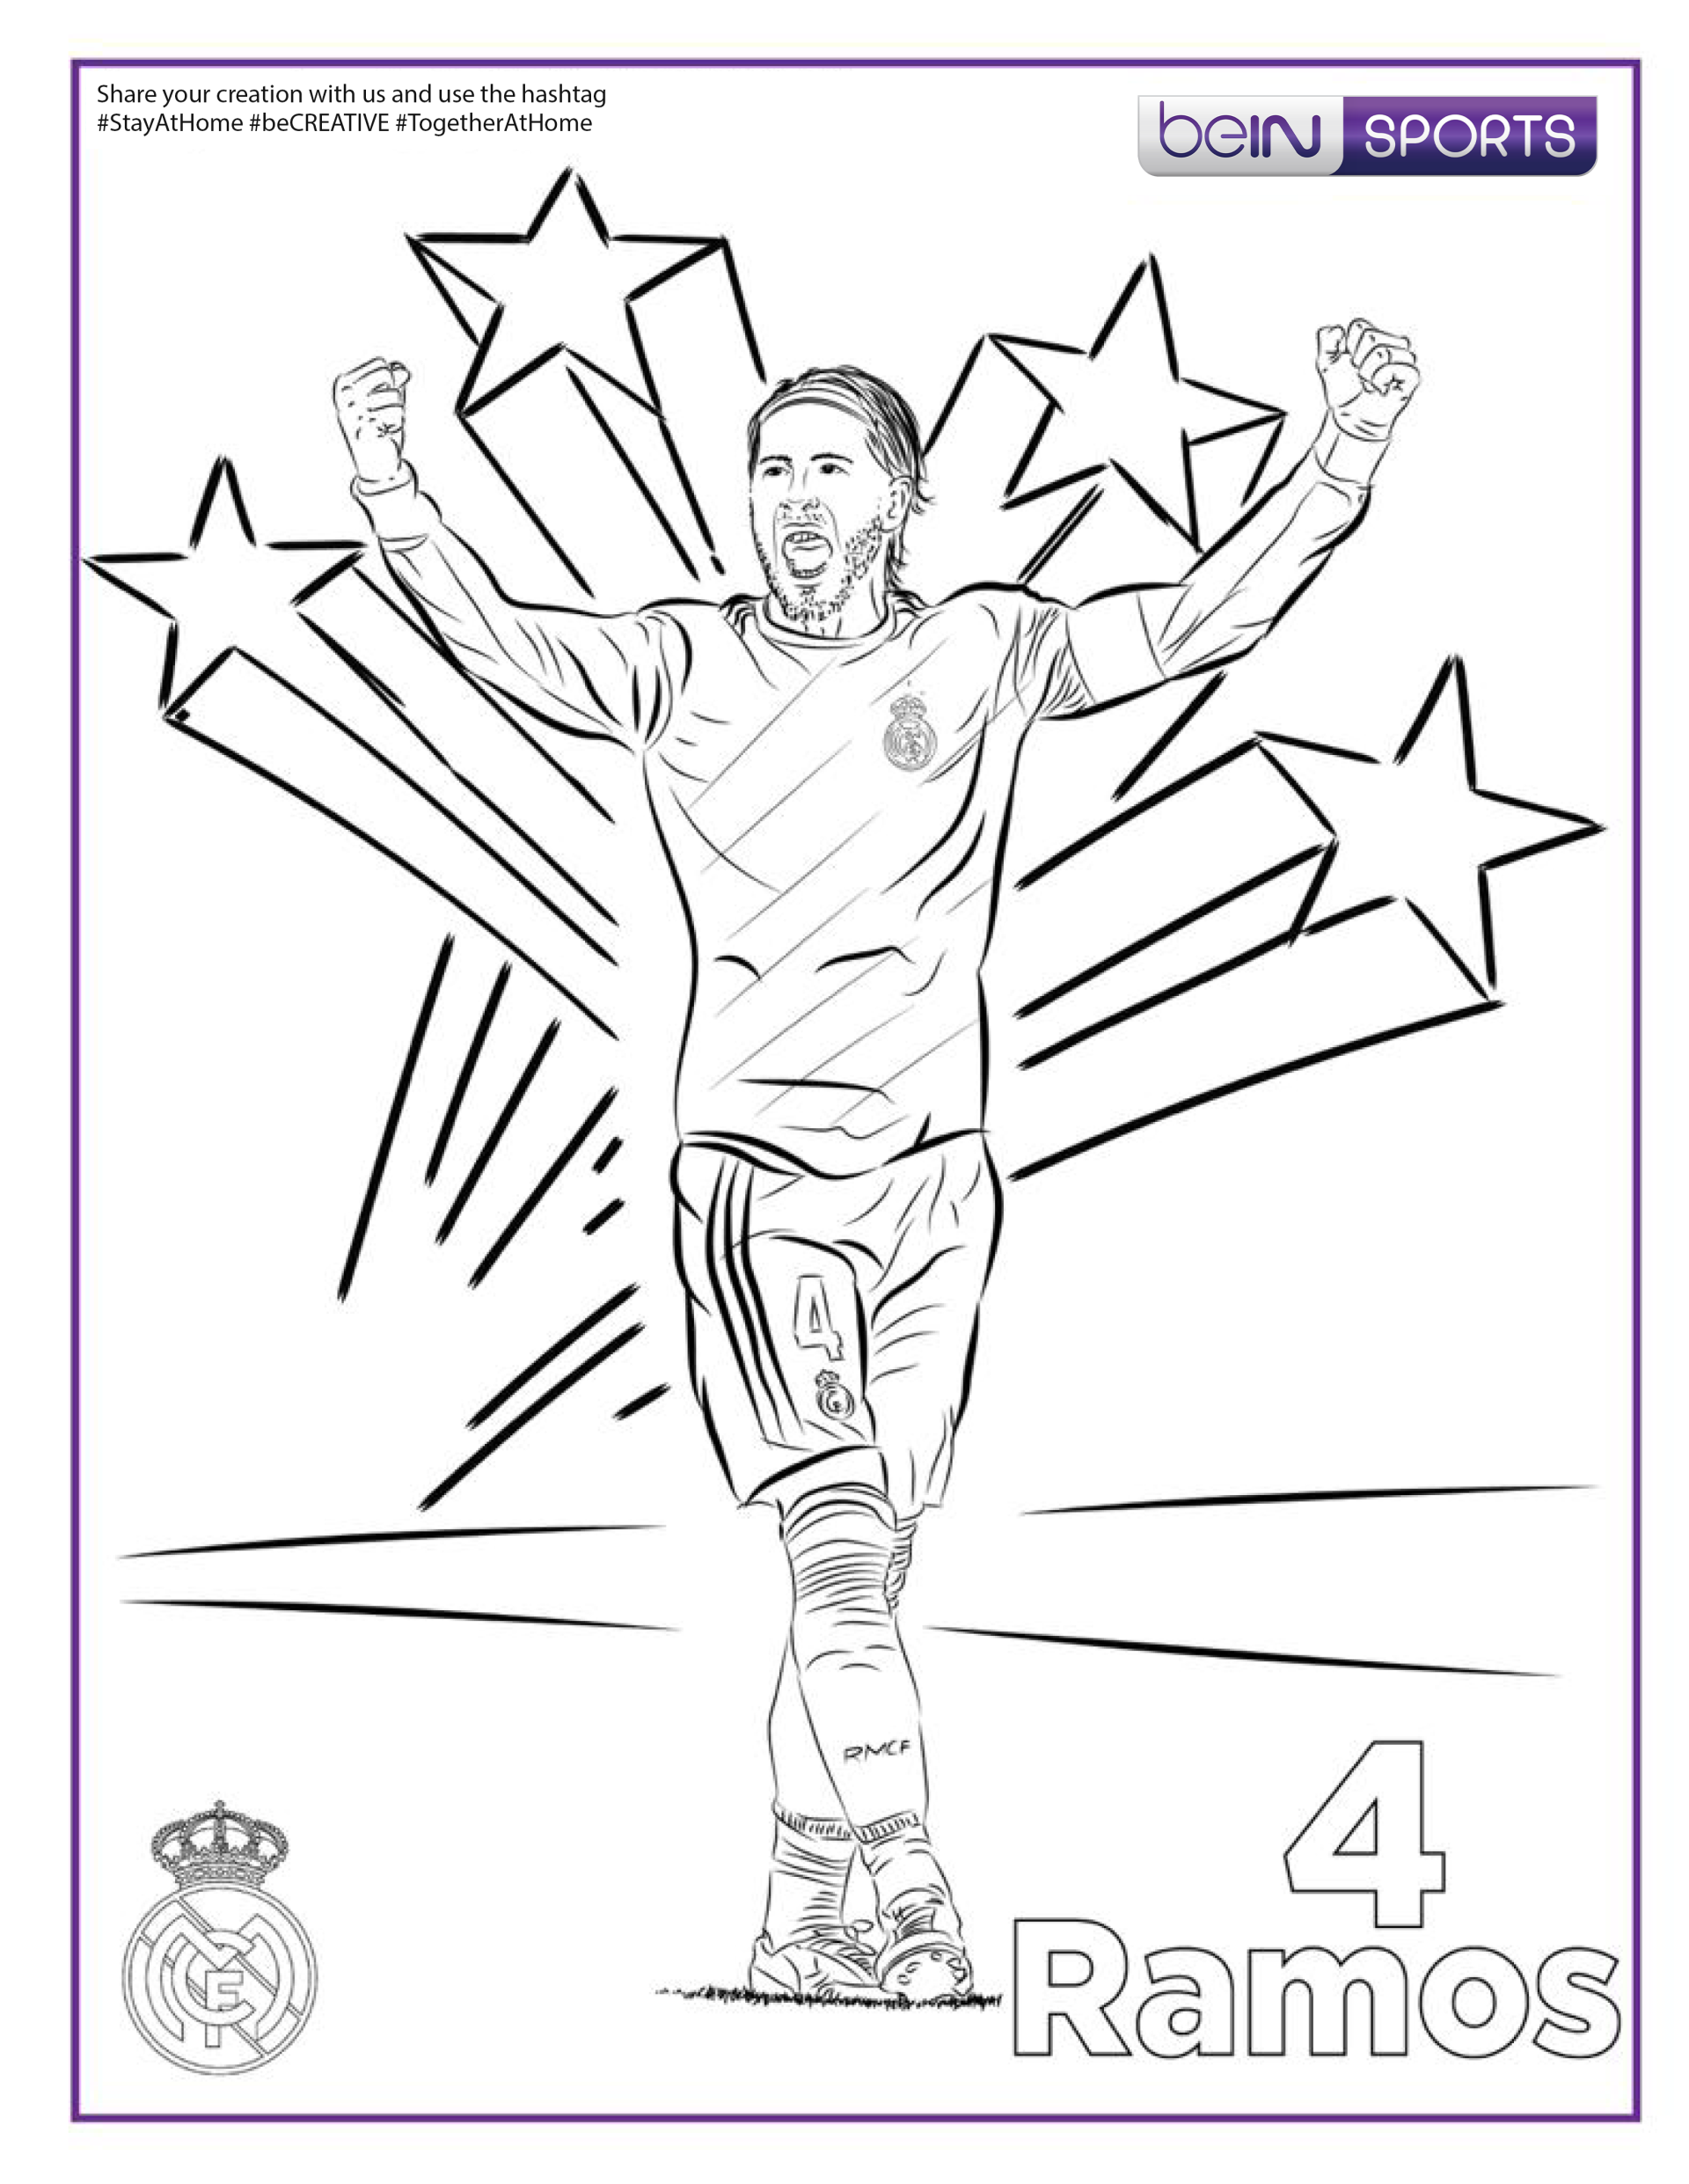 Colouring book images singapore bein sports